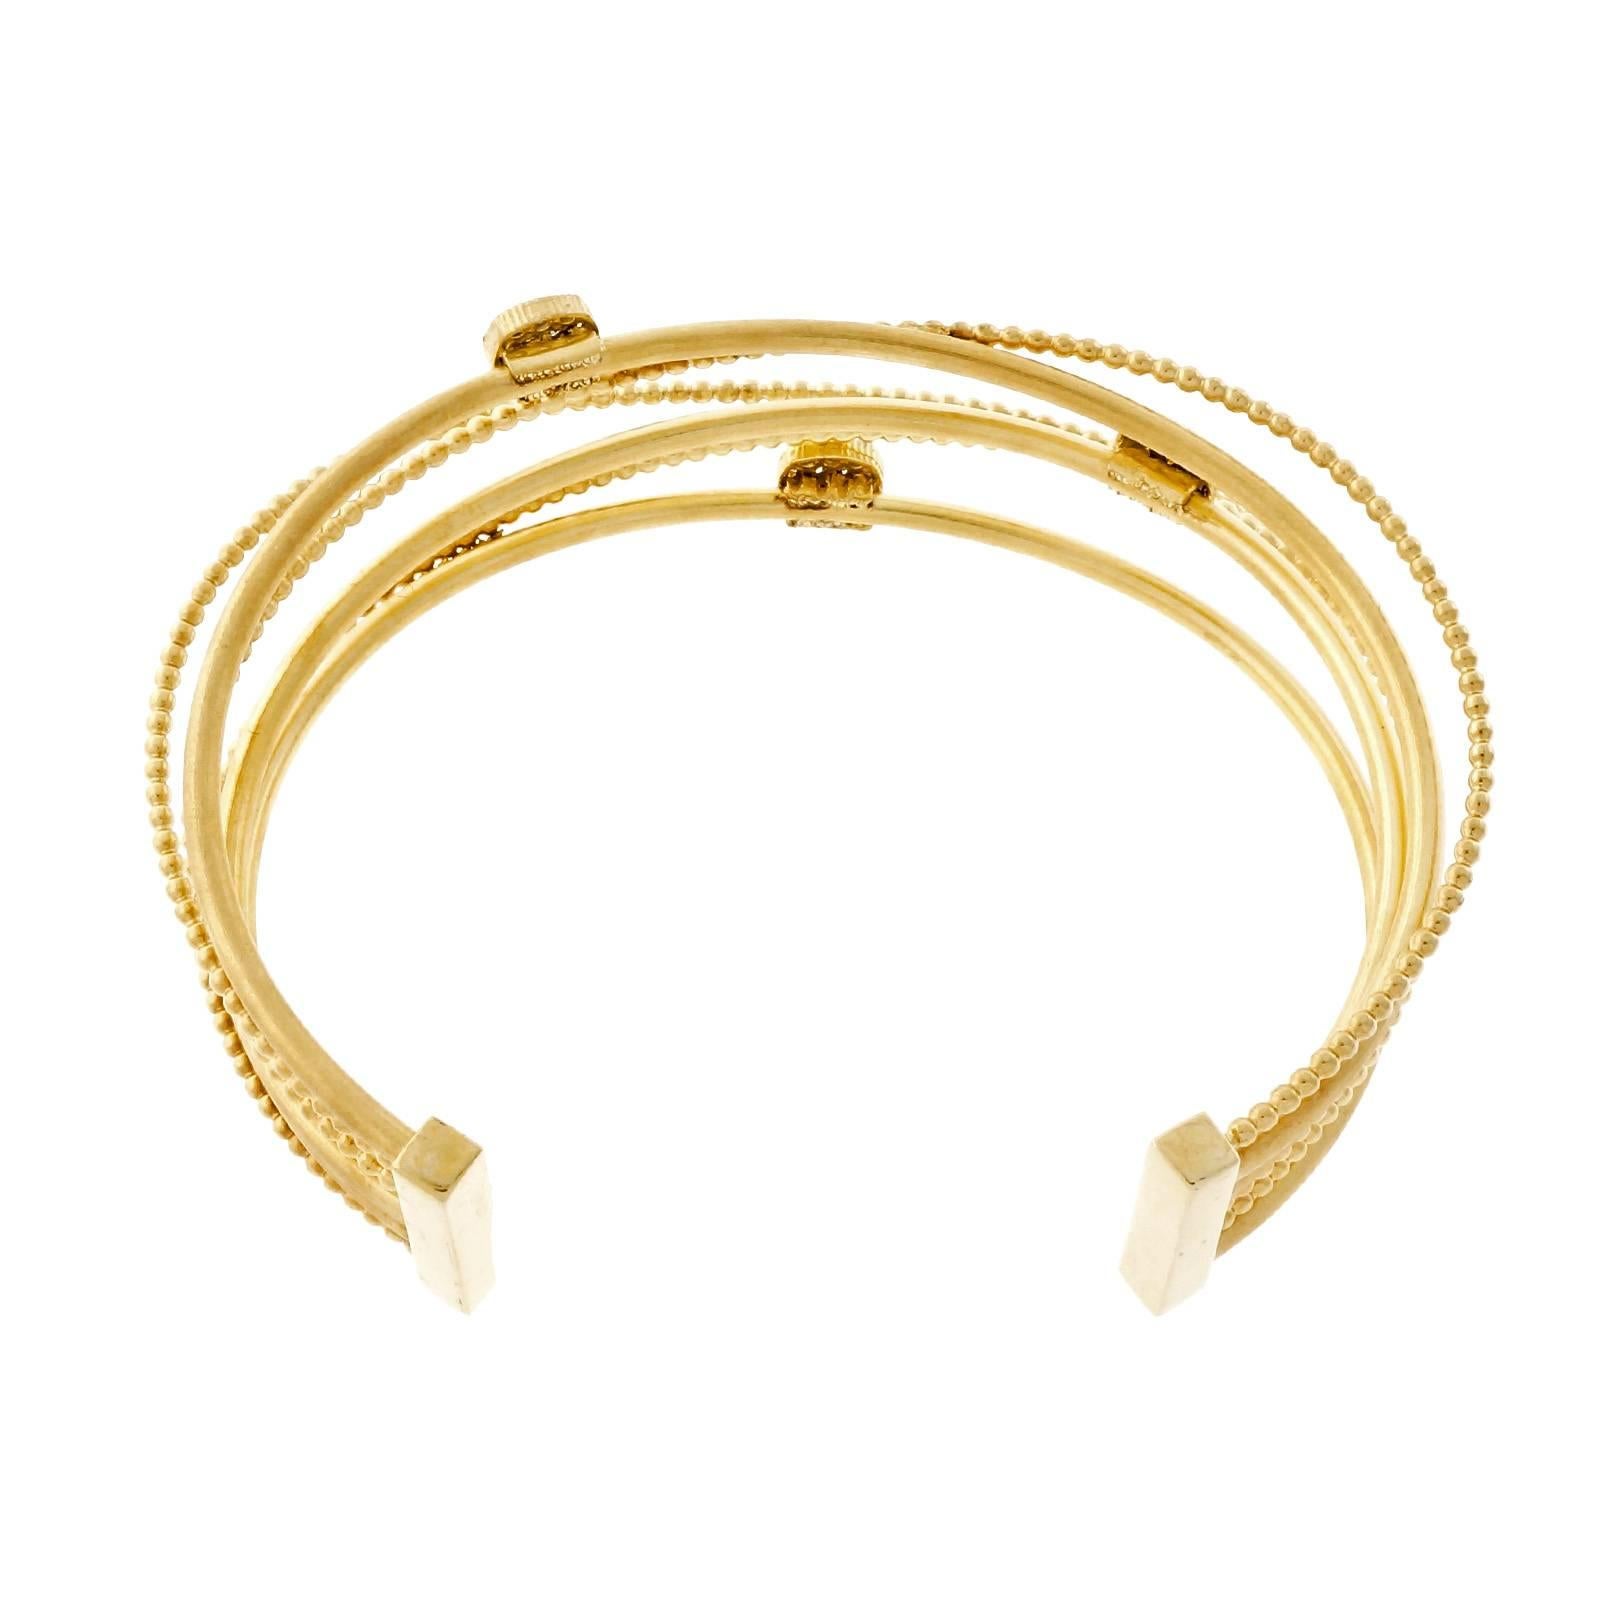 Isaac Reiss Designer slip on diamond 14k yellow gold cuff bracelet.

42 round diamonds, approx. total weight .33cts, H, VS
14k yellow gold
Tested and stamped: 14k
Hallmark: I. Reiss
22.2 grams
Fits a standard 7 to 7 1/2 inch wrist
Inside